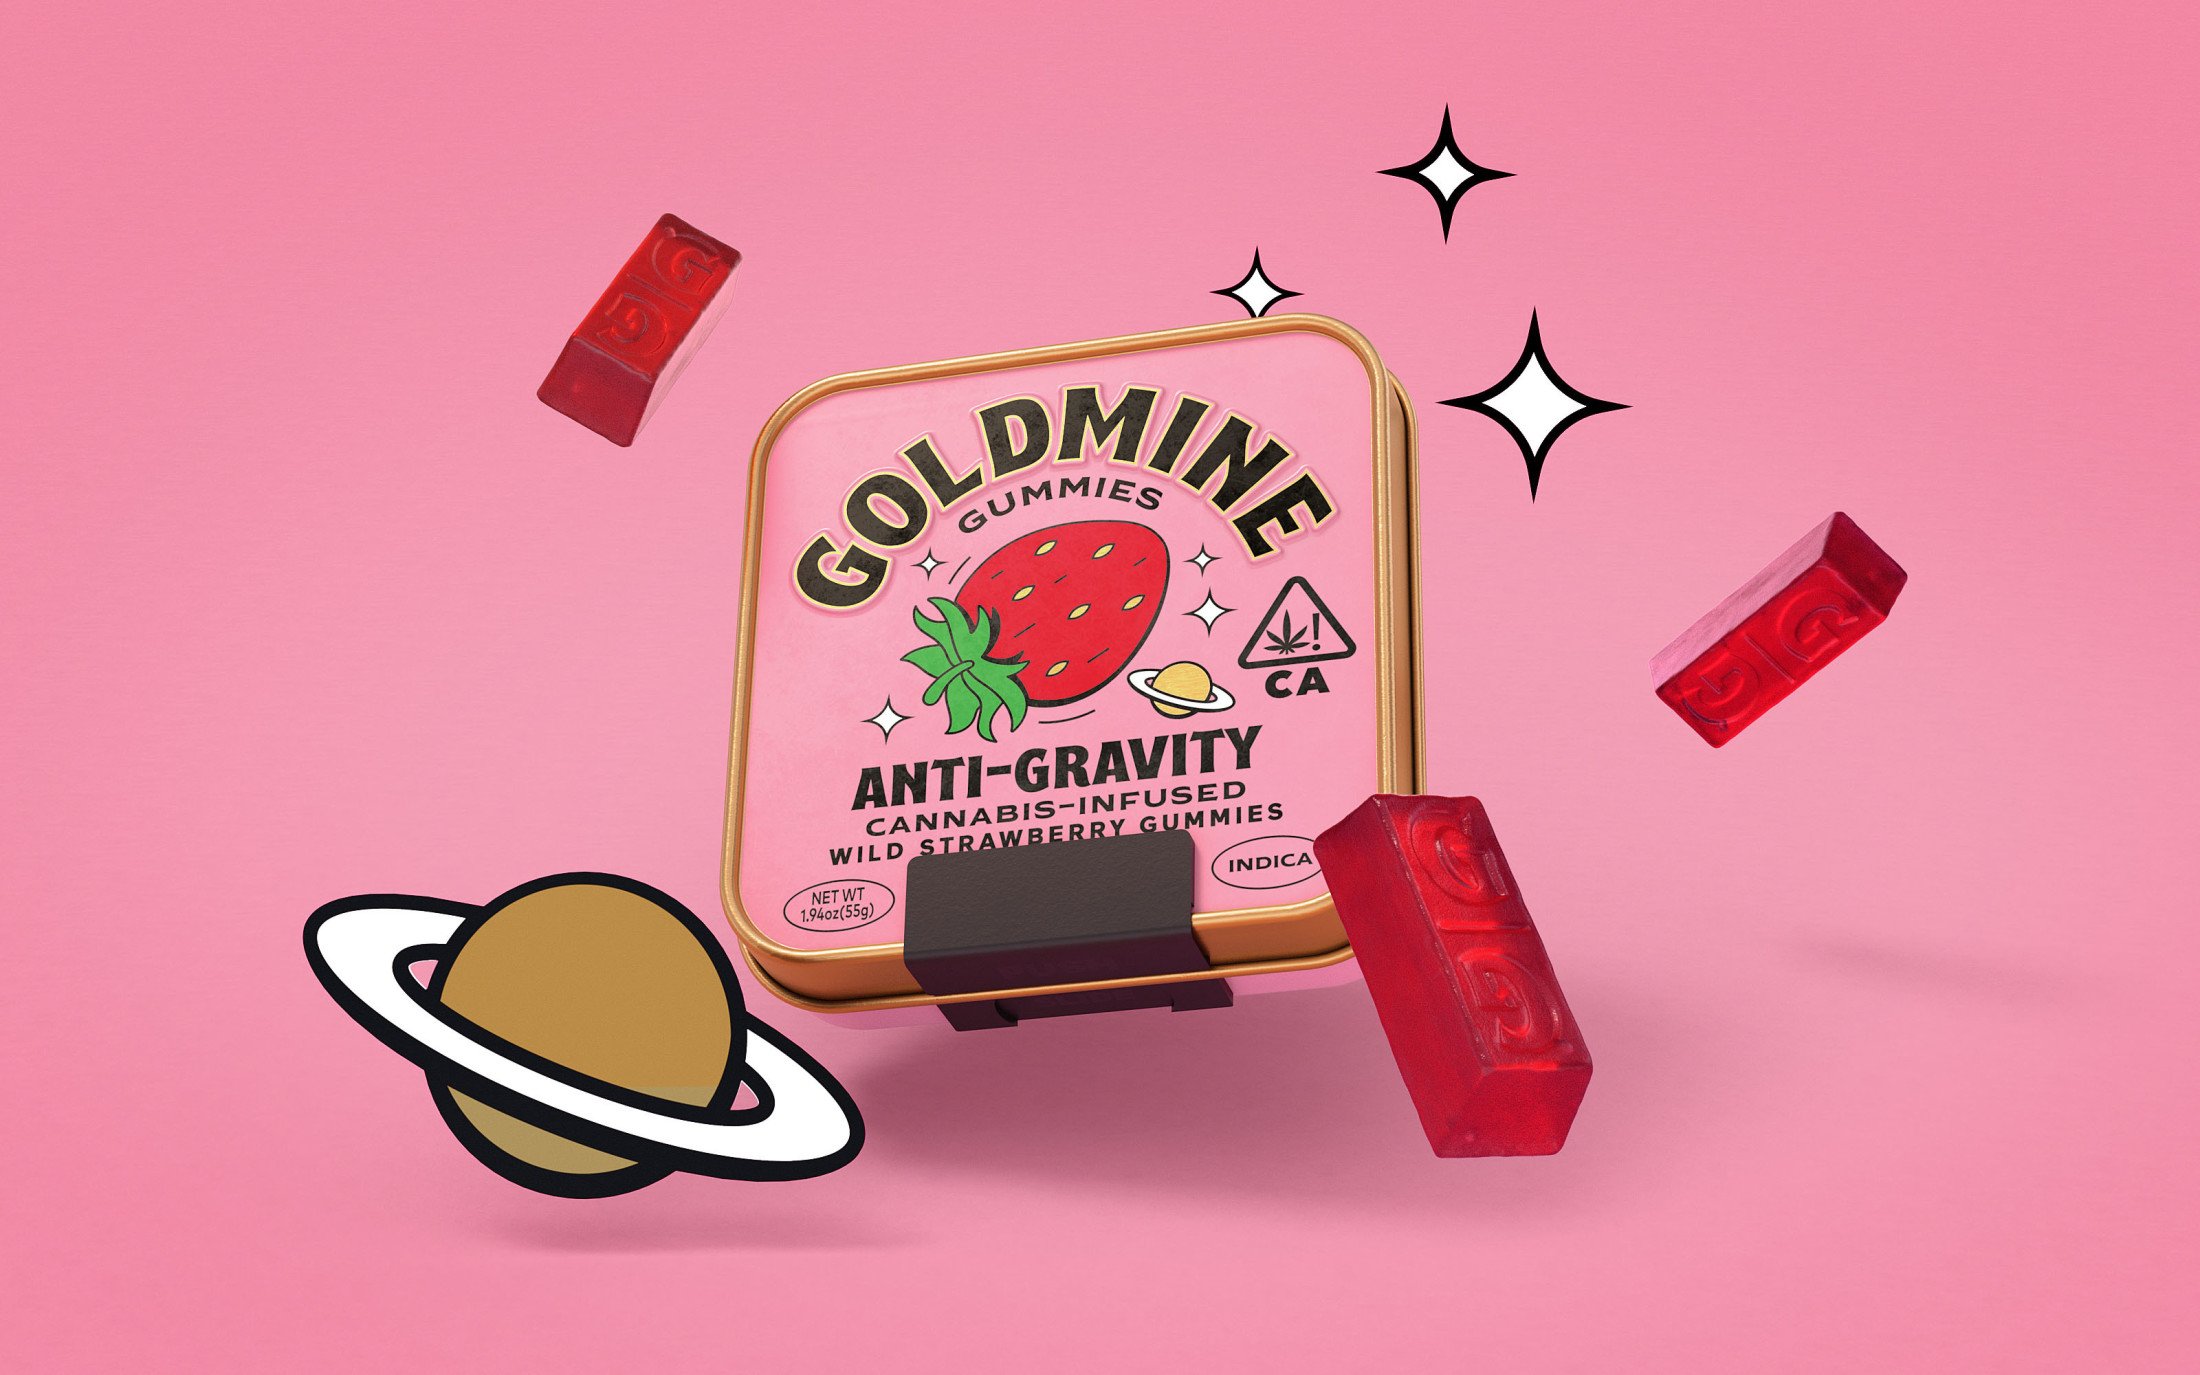 Packaging design by Leeds-based Robot Food for cannabis-infused sweets Goldmine Gummies